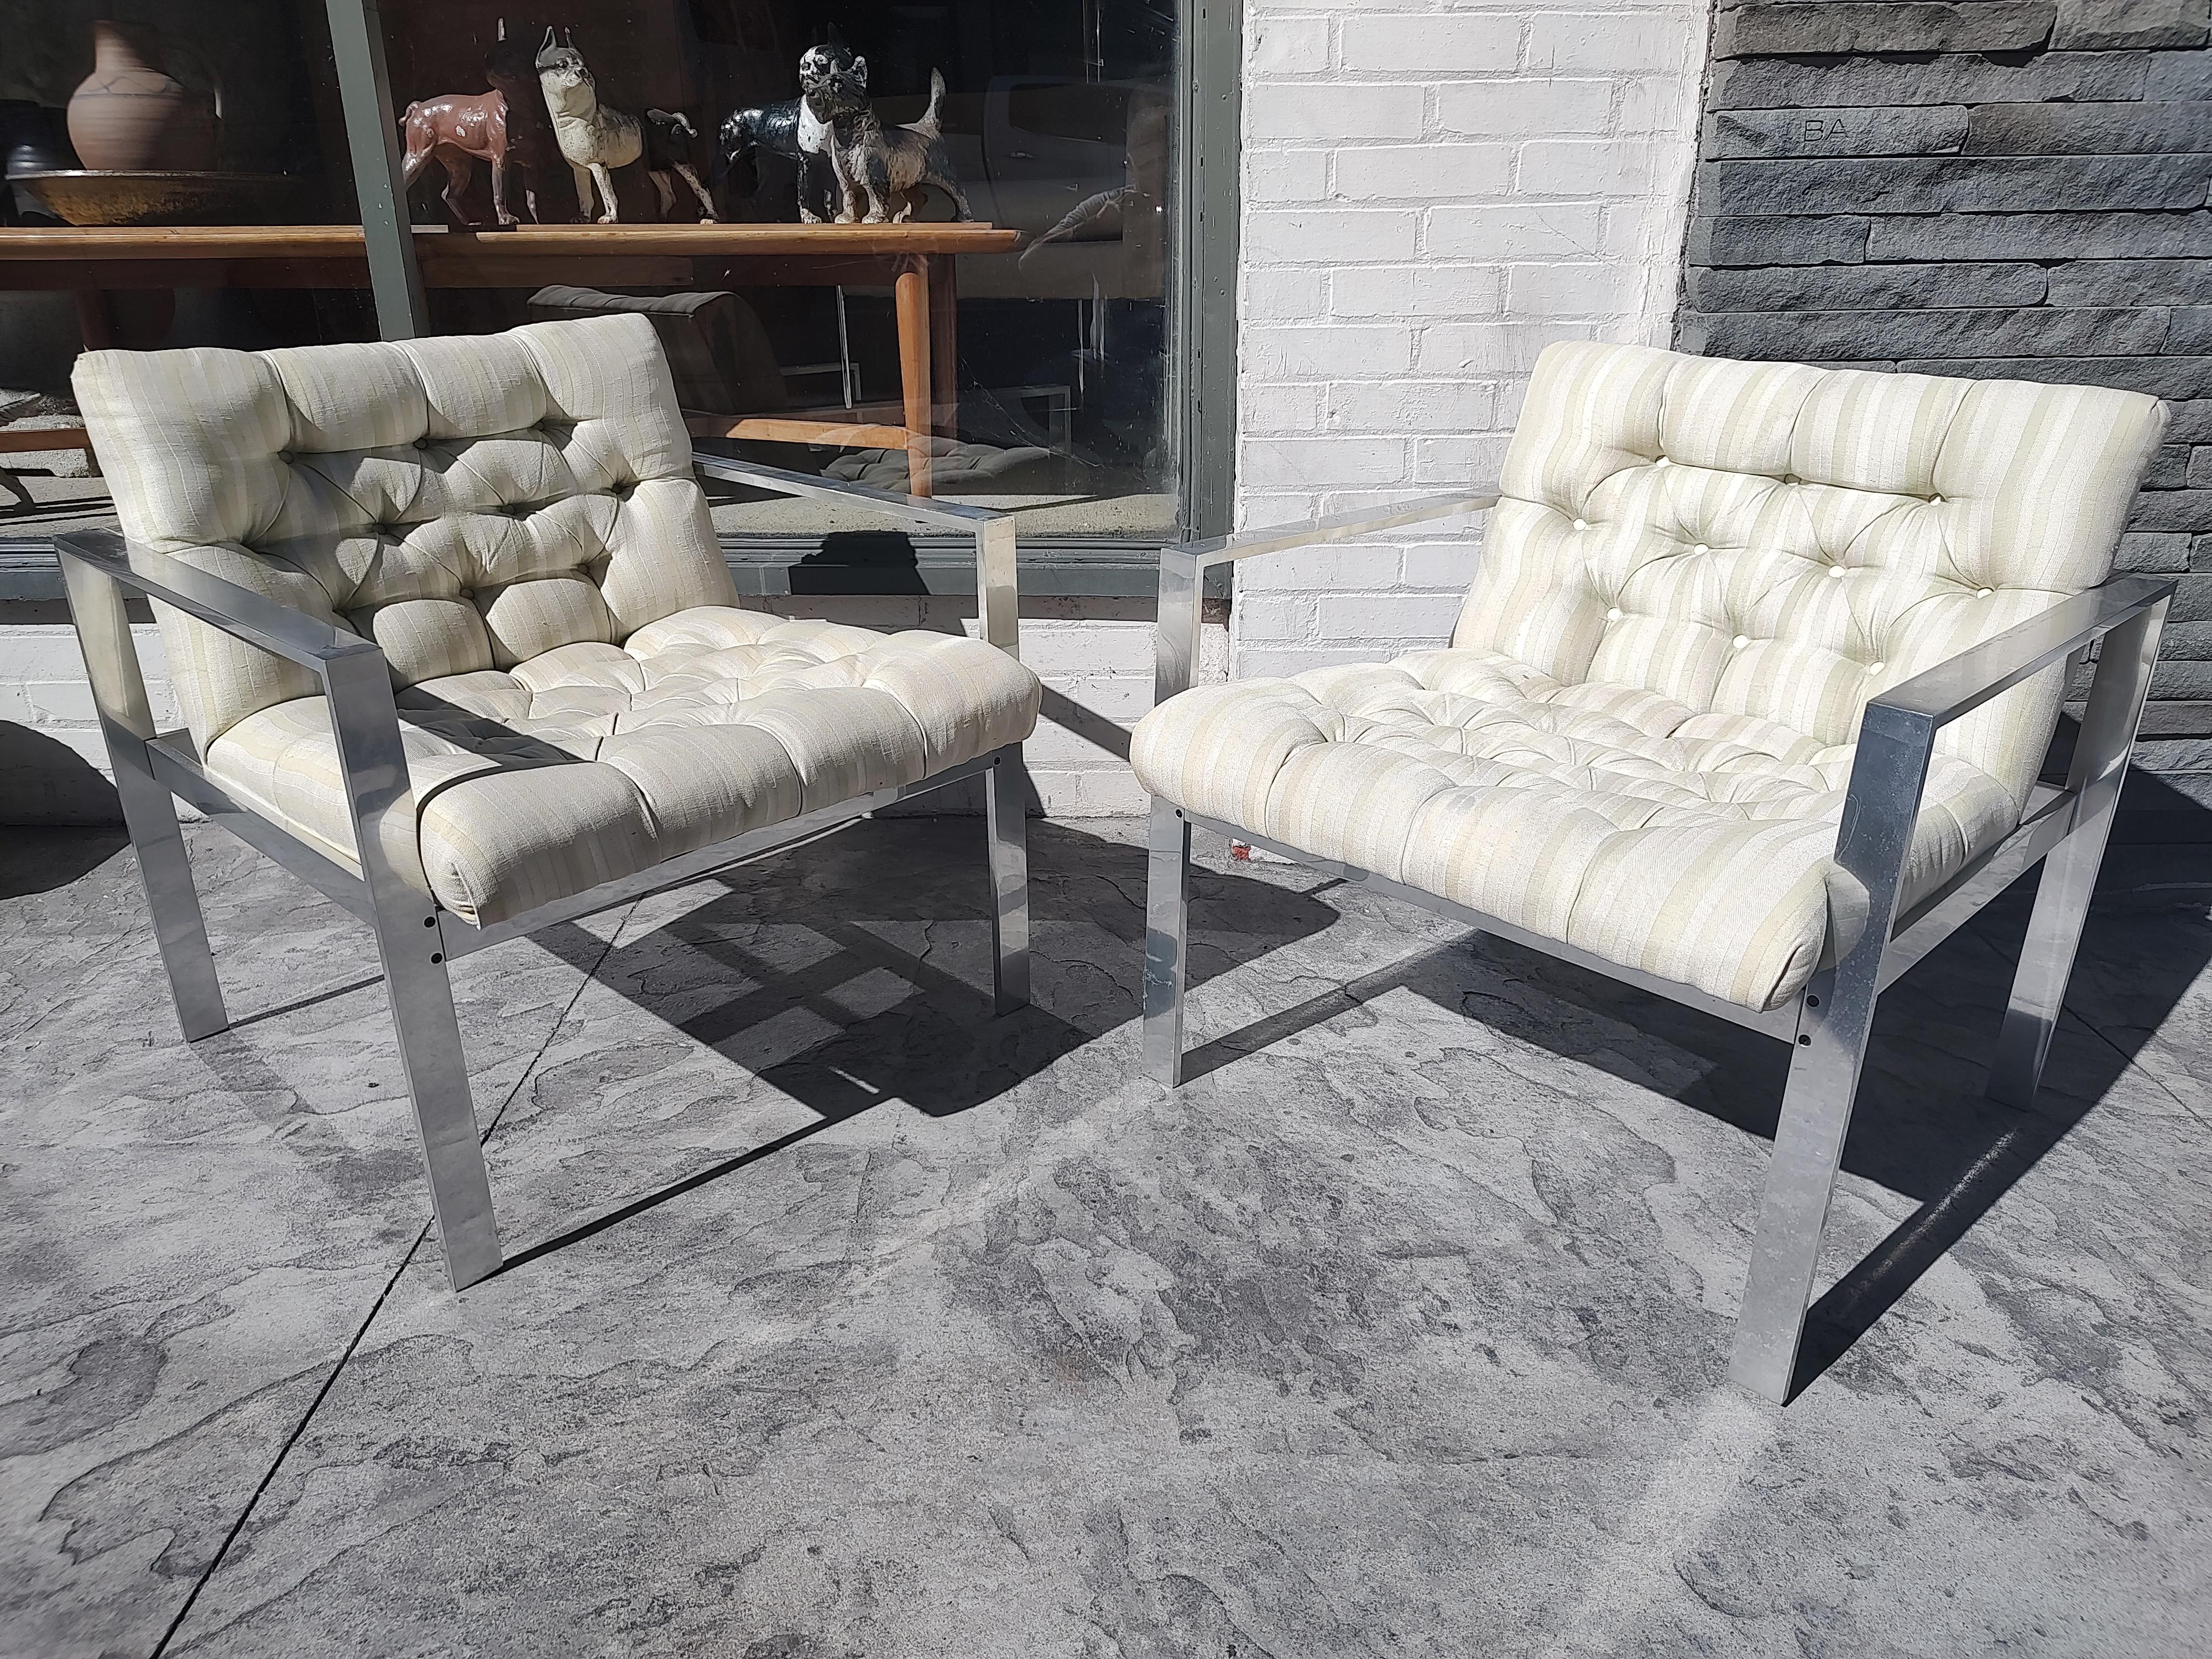 Pair of Mid-Century Modern Tufted Aluminum Lounge Chairs by Harvey Probber For Sale 5